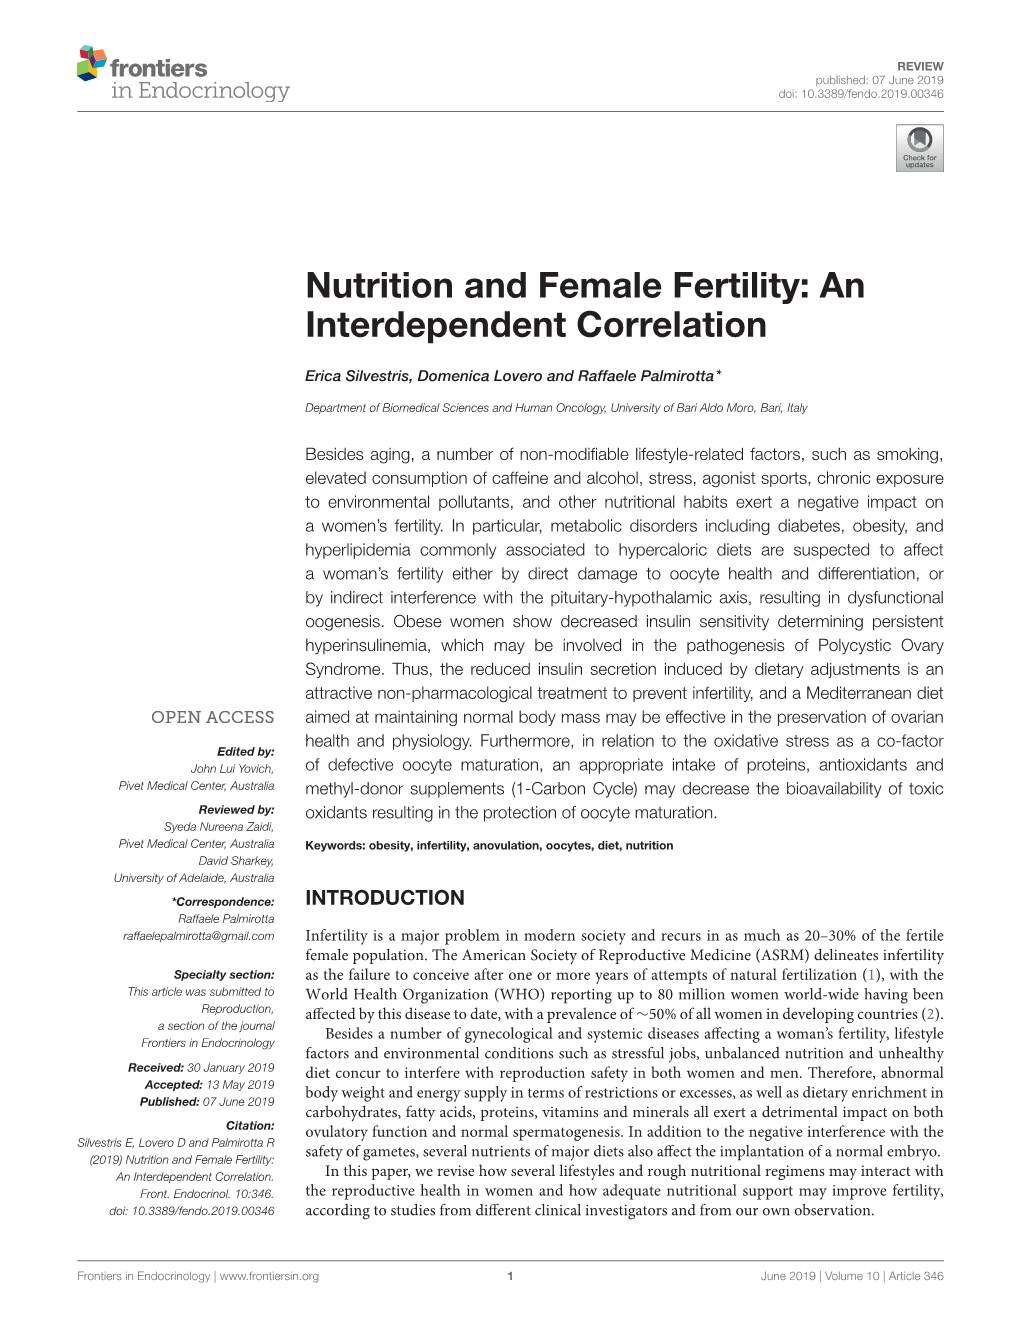 Nutrition and Female Fertility: an Interdependent Correlation